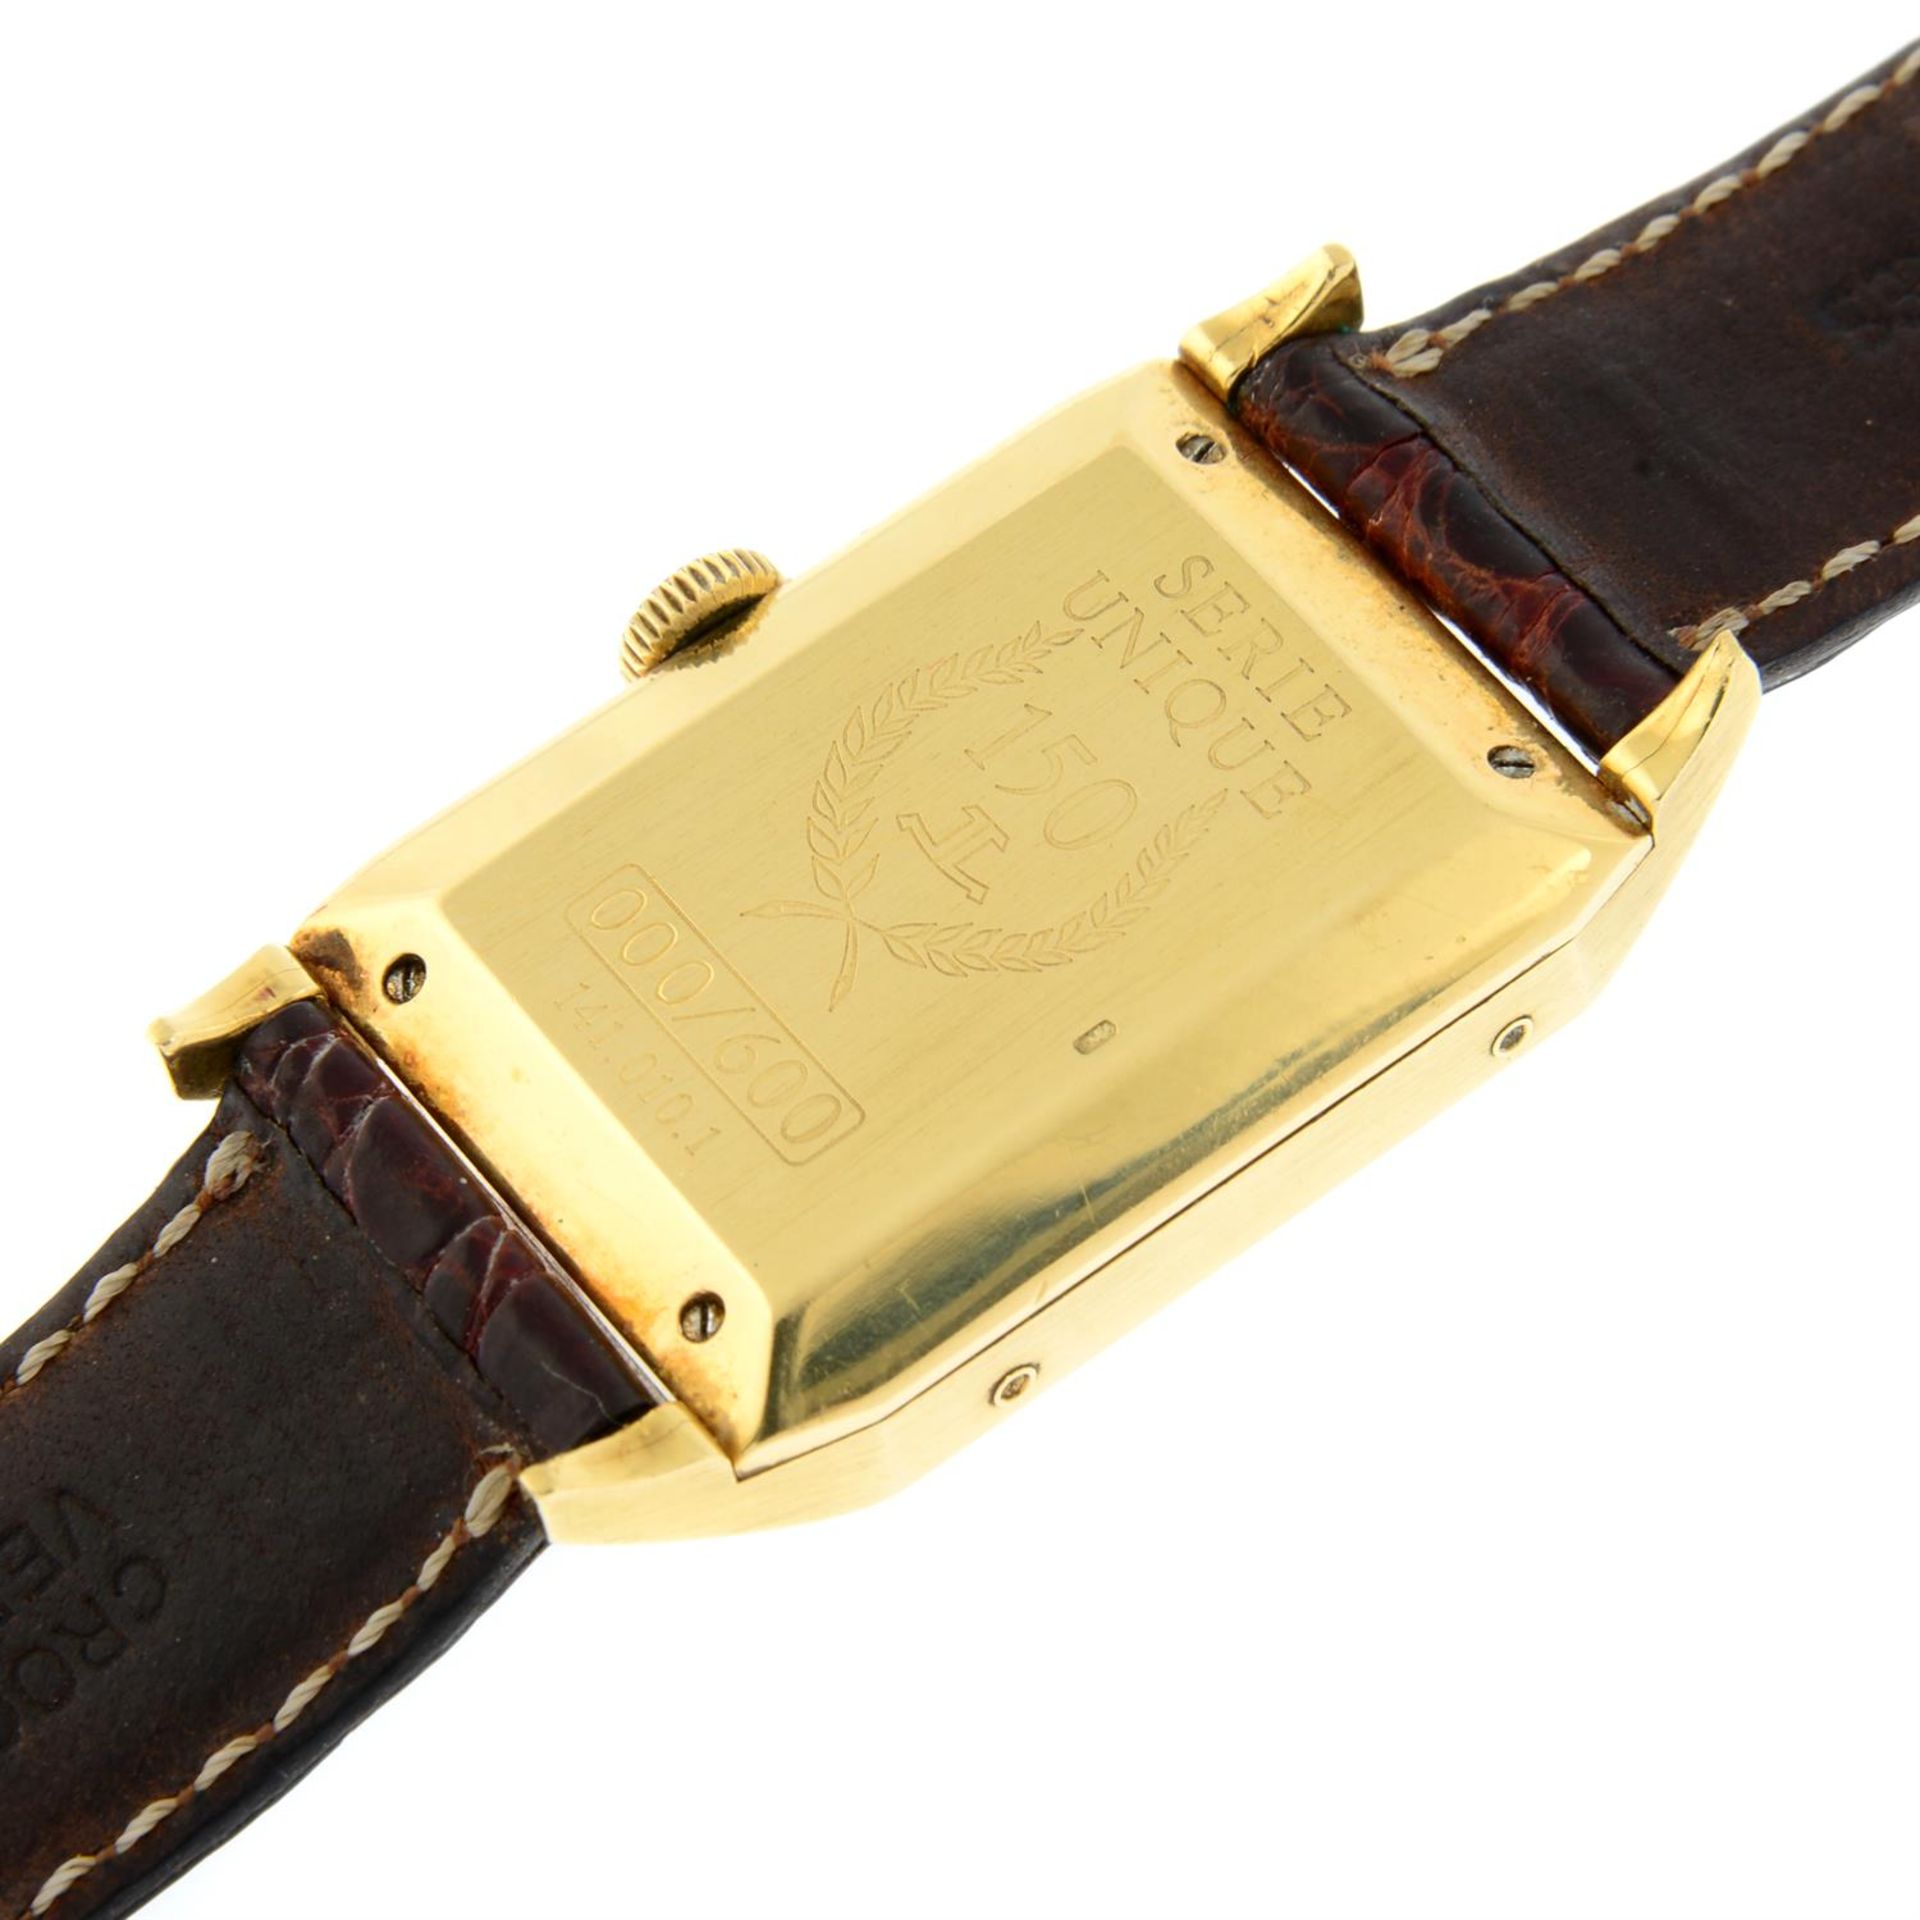 JAEGER-LECOULTRE - an 18ct yellow gold Serie Unique triple-calendar moonphase wrist watch, 24mm. - Image 5 of 7